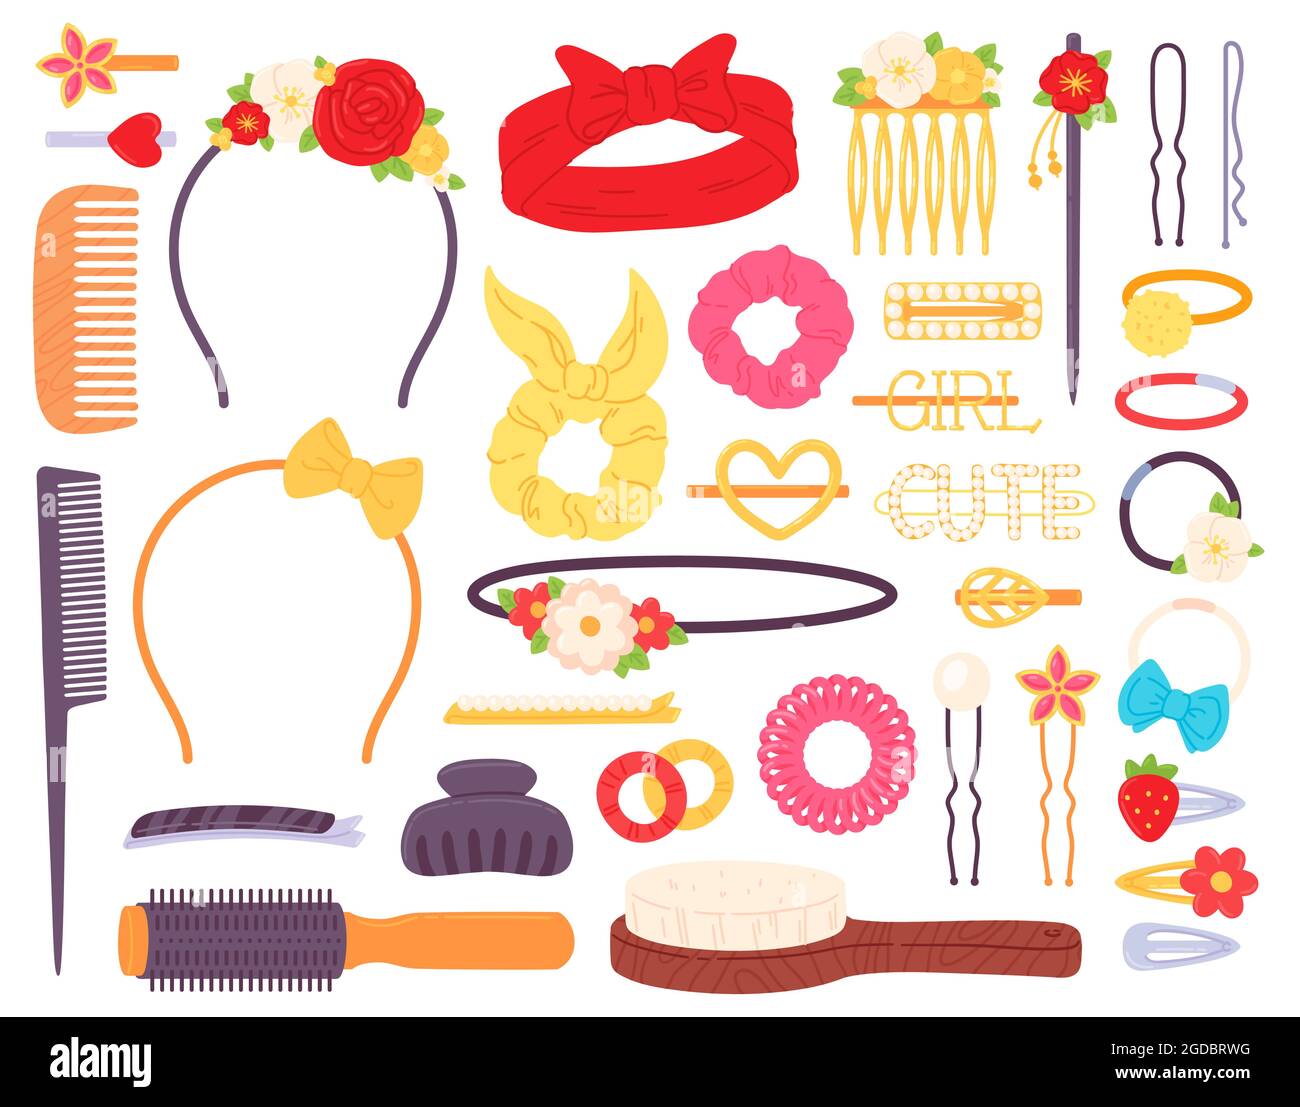 Hair clips with flowers and pearls, bow headband and hairpins. Fashion jewelry accessory for hairstyle. Barrettes, pins and combs vector set Stock Vector